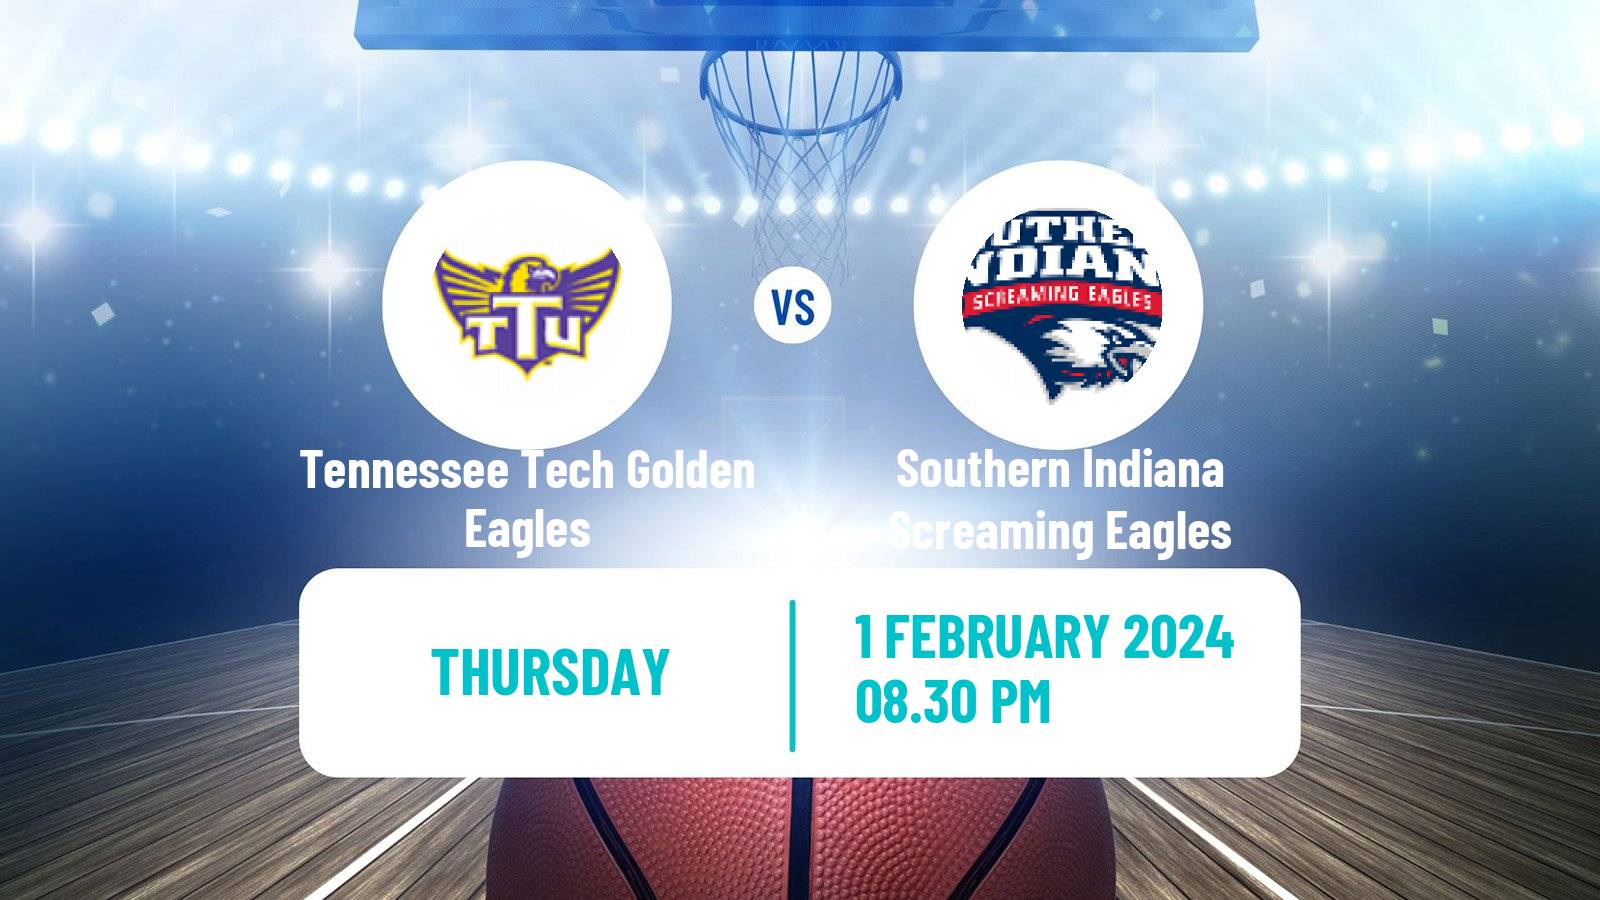 Basketball NCAA College Basketball Tennessee Tech Golden Eagles - Southern Indiana Screaming Eagles